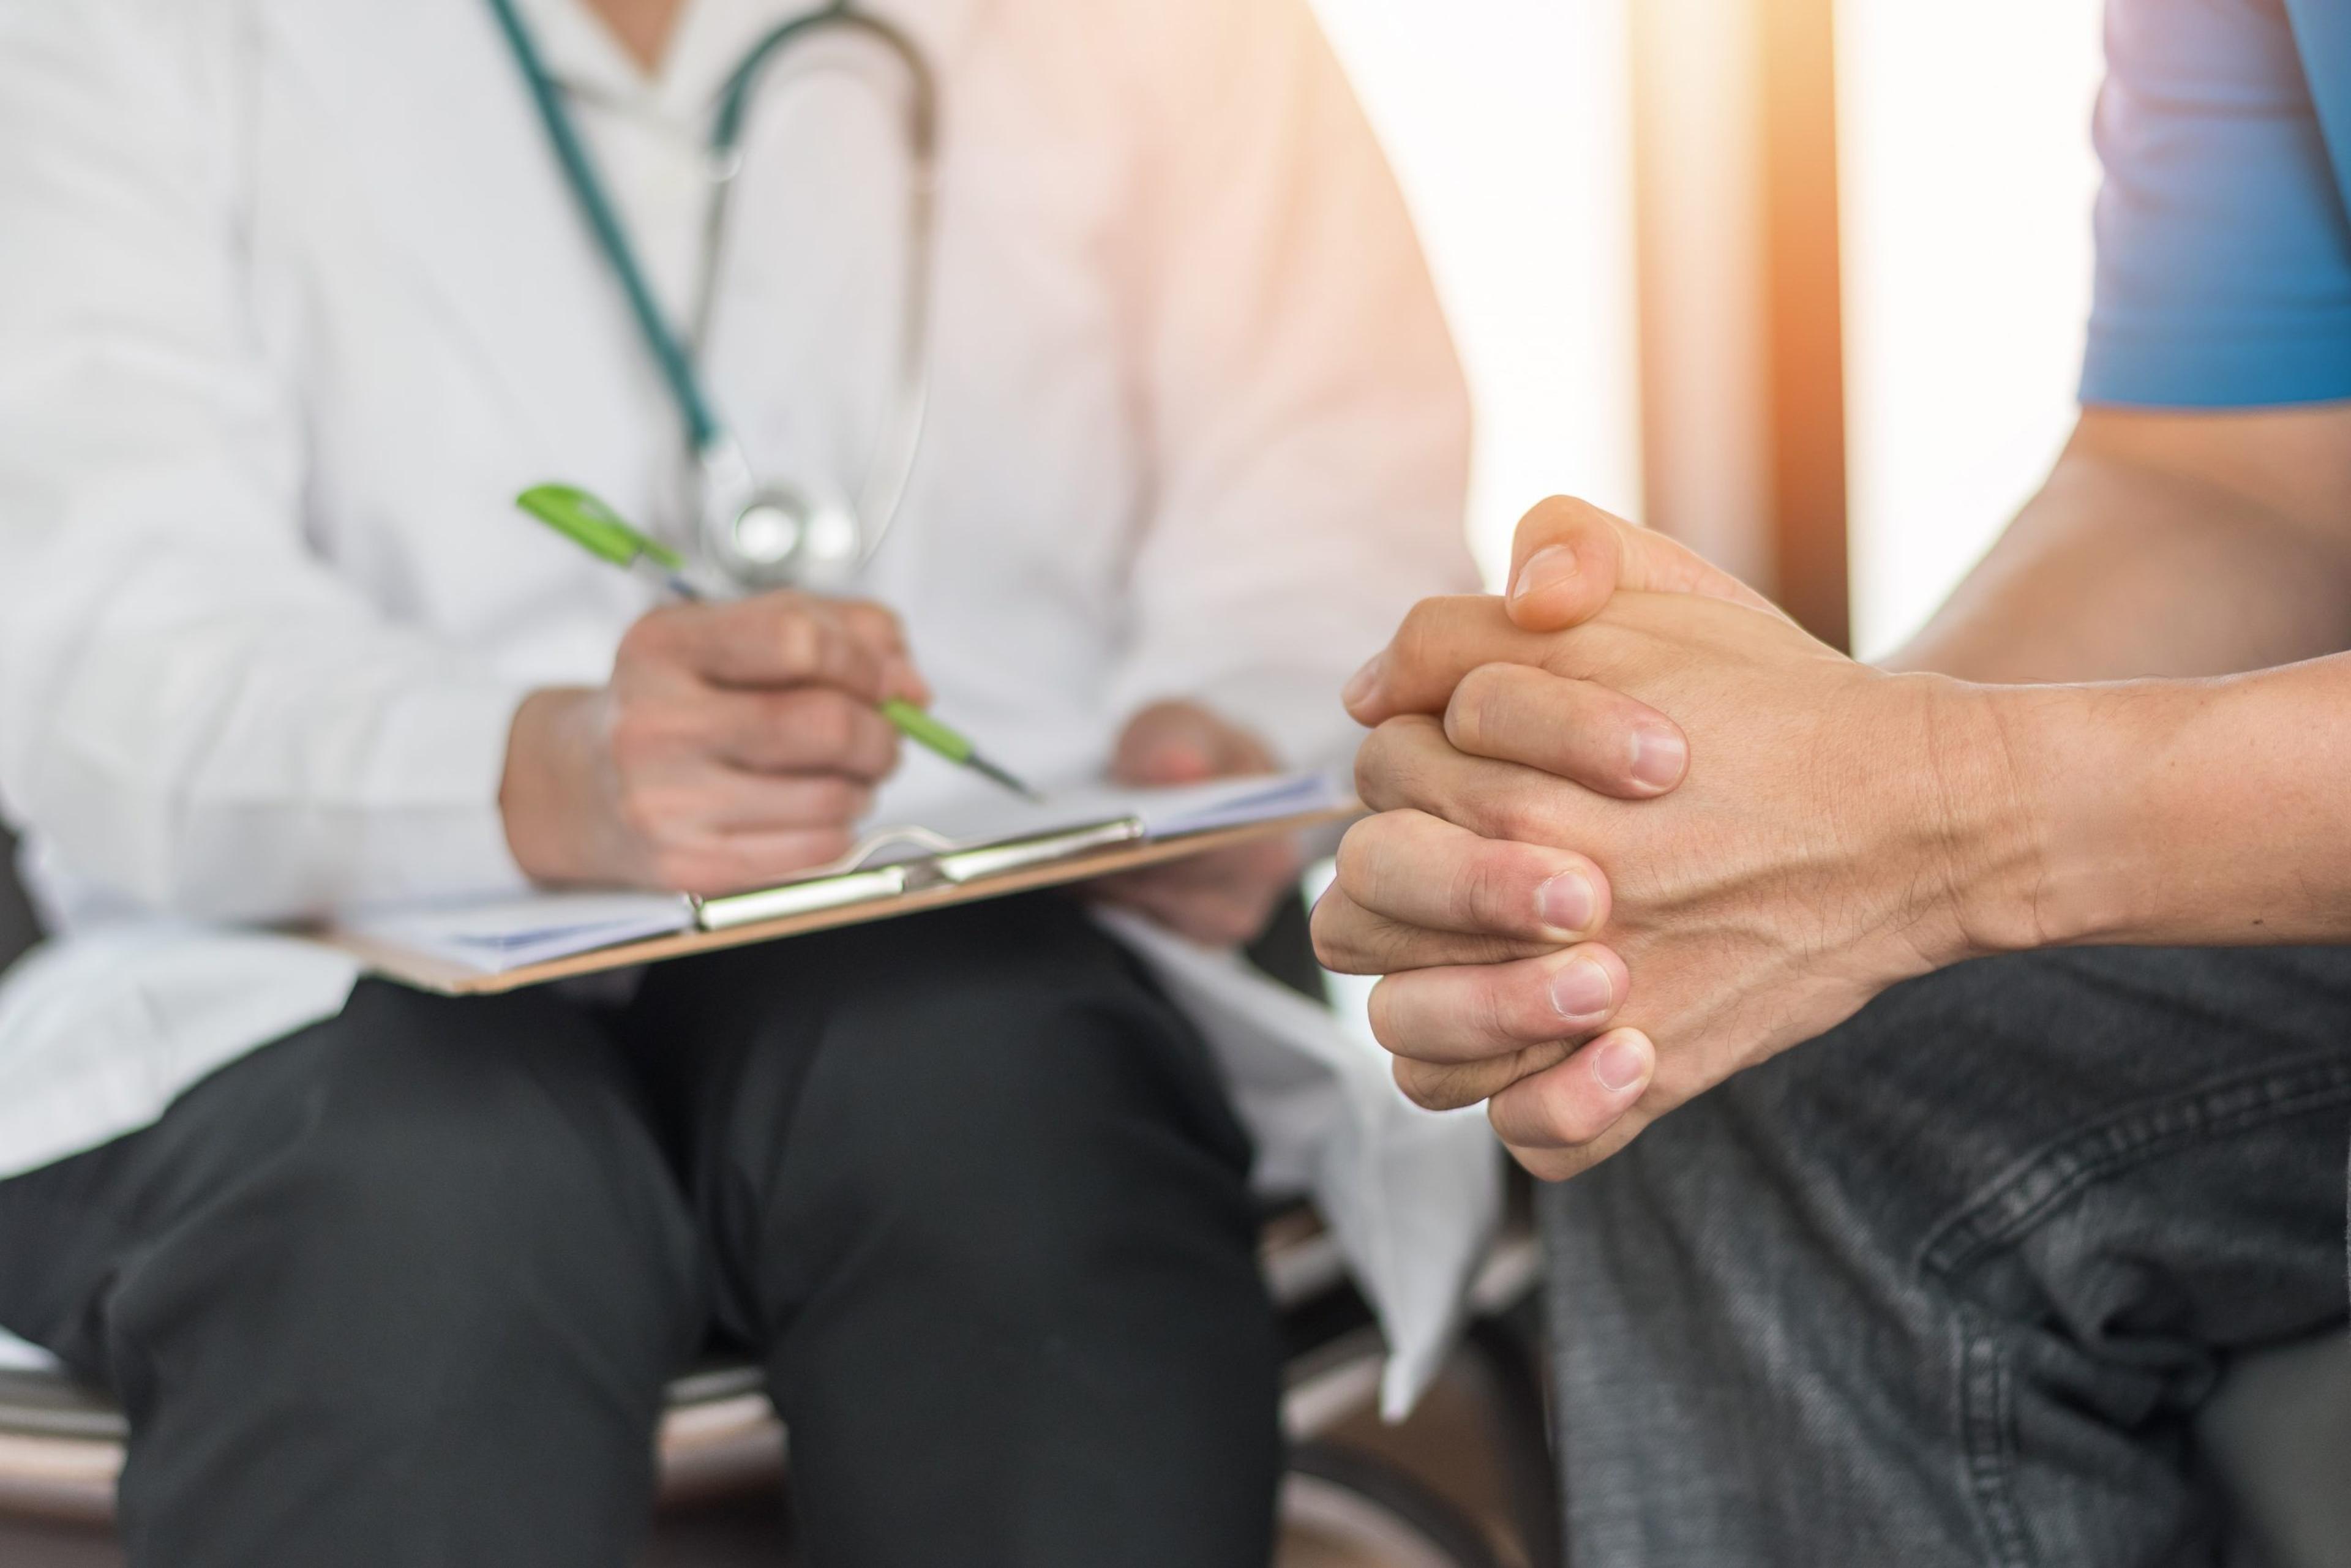 Close up image of doctor meeting with patient with clasped hands